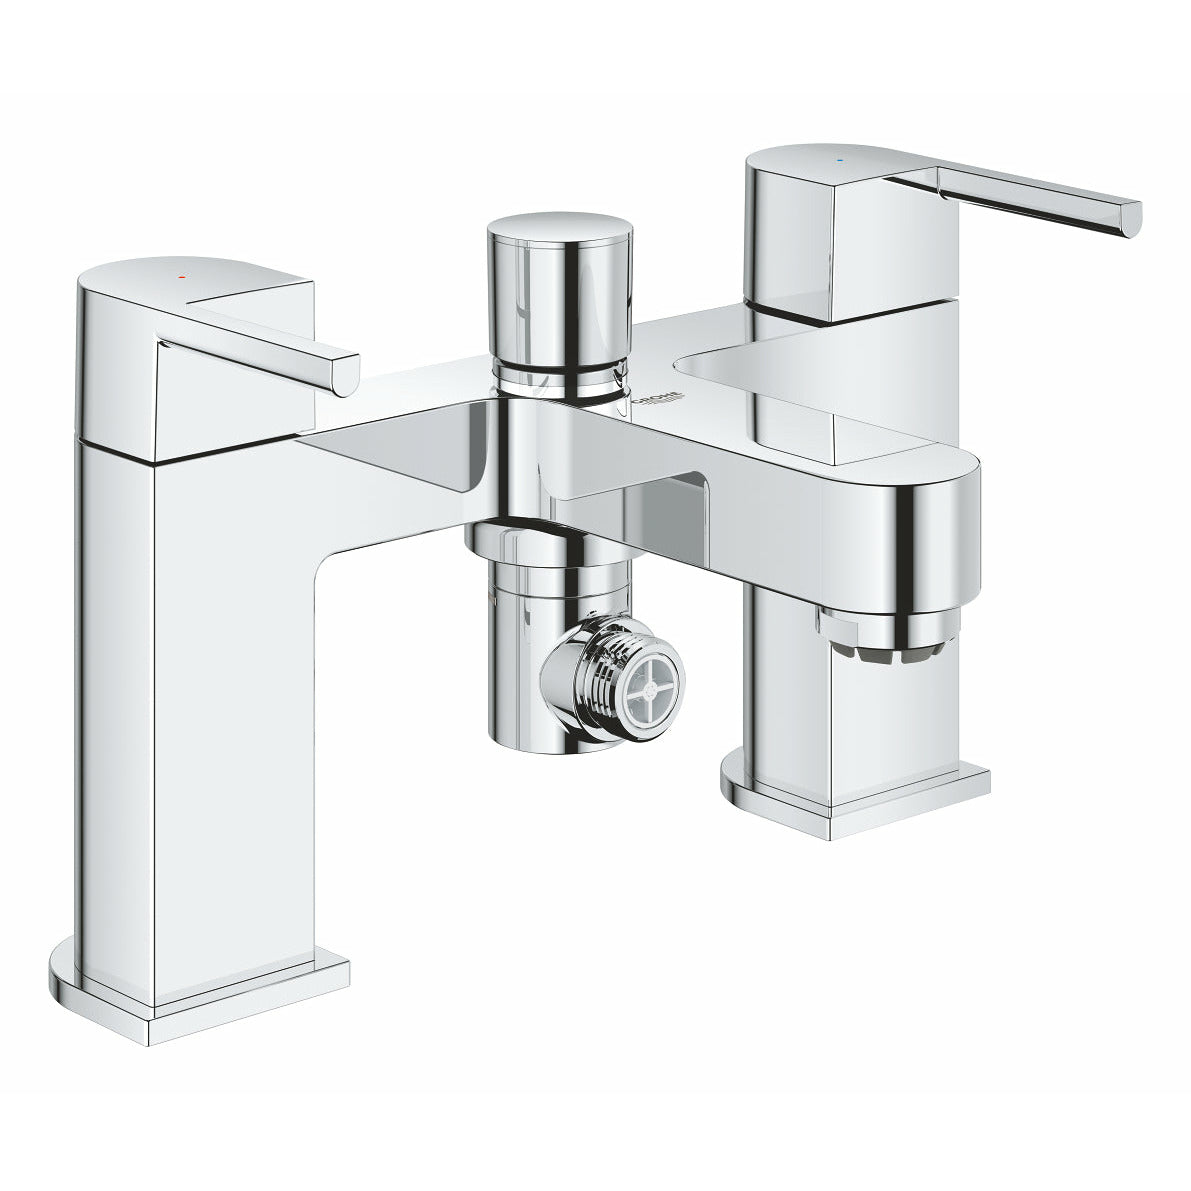 Grohe Deck Mounted Chrome Plus Two-handled Bath/Shower mixer ﾽ" - Letta London - 